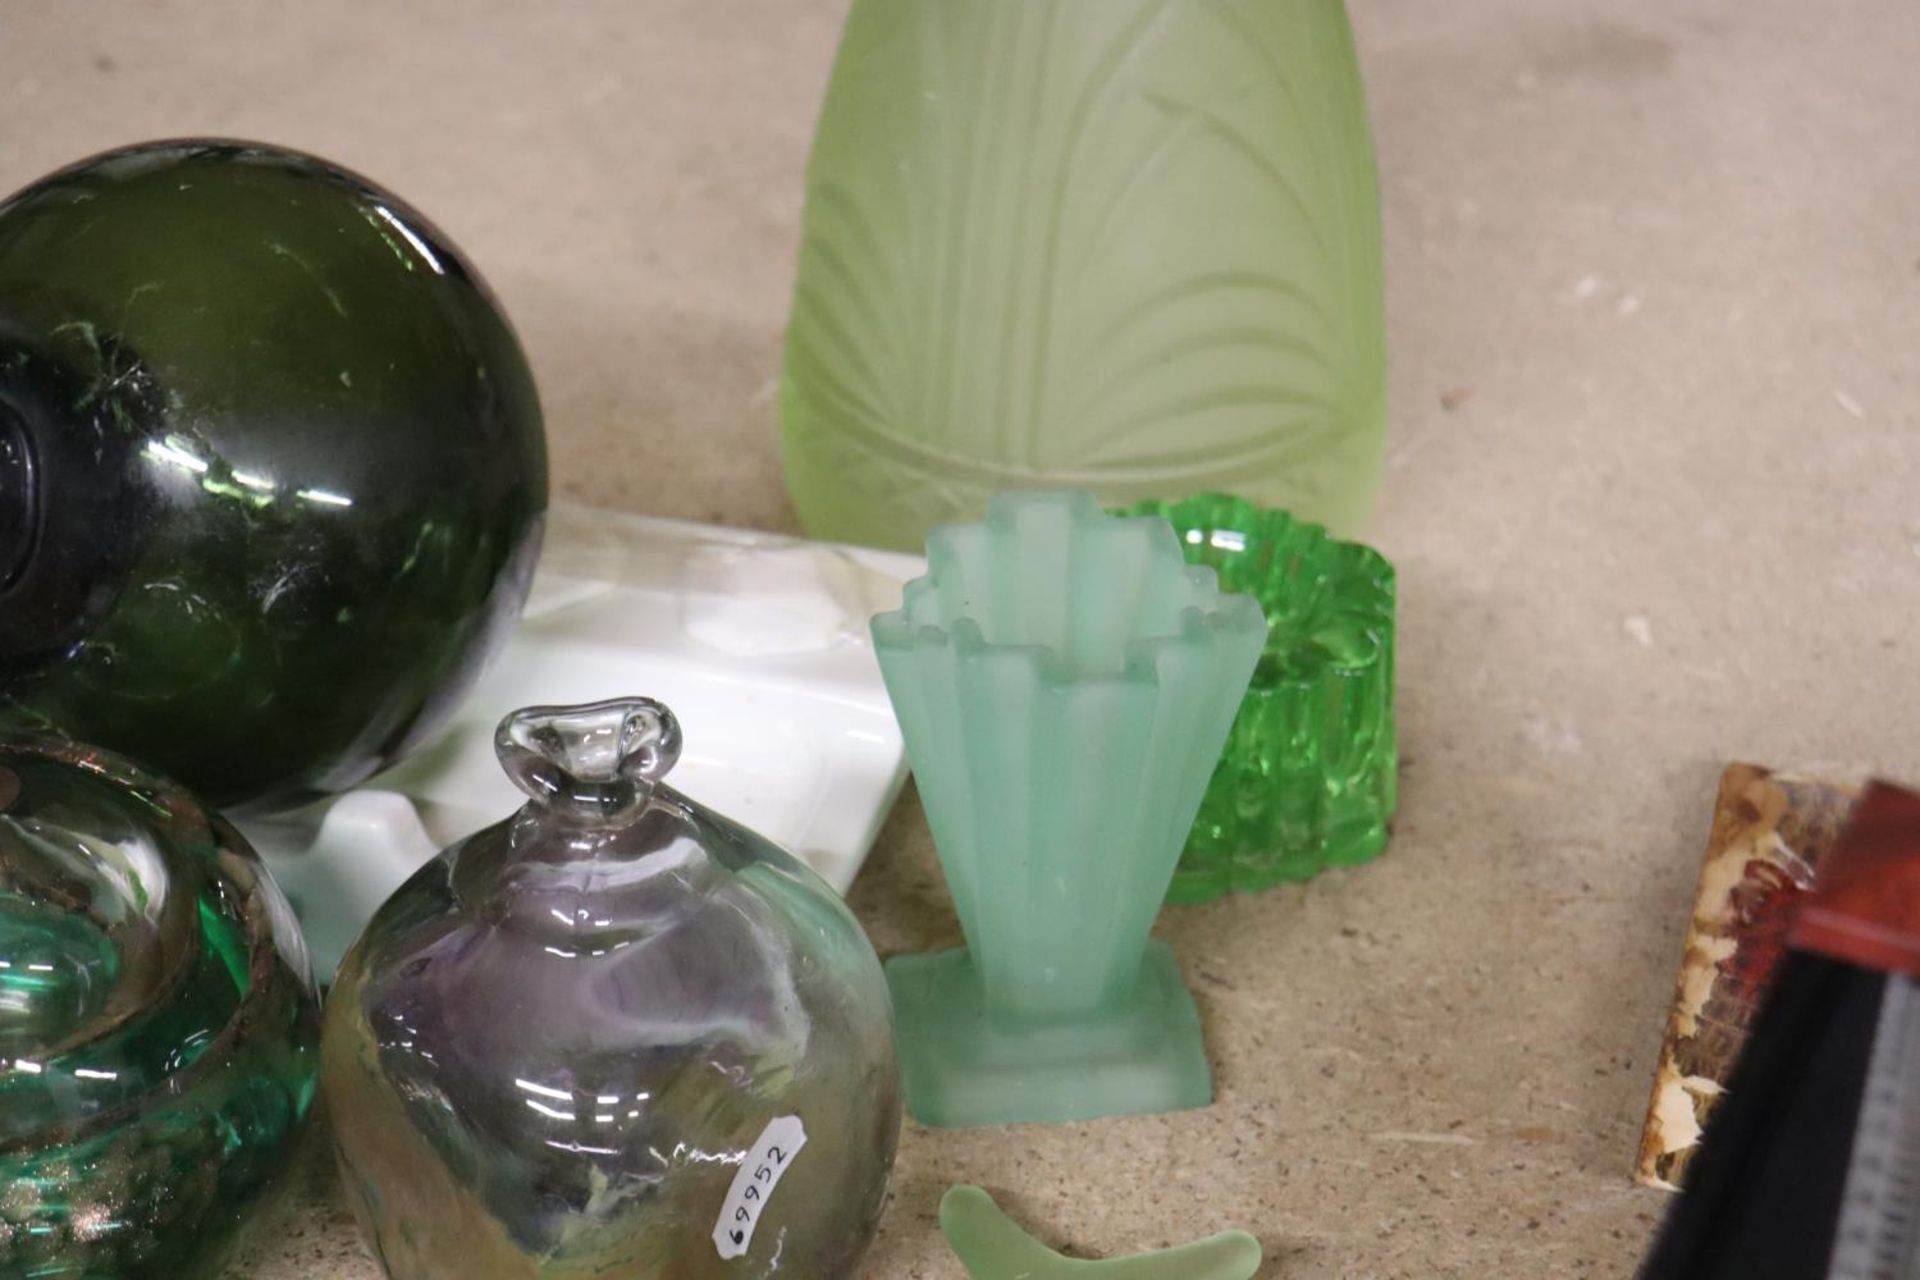 A QUANTITY OF VINTAGE GLASS TO INLCUDE TWO ROLLING PINS, GREEN GLASS VASES, ETC - Image 5 of 5